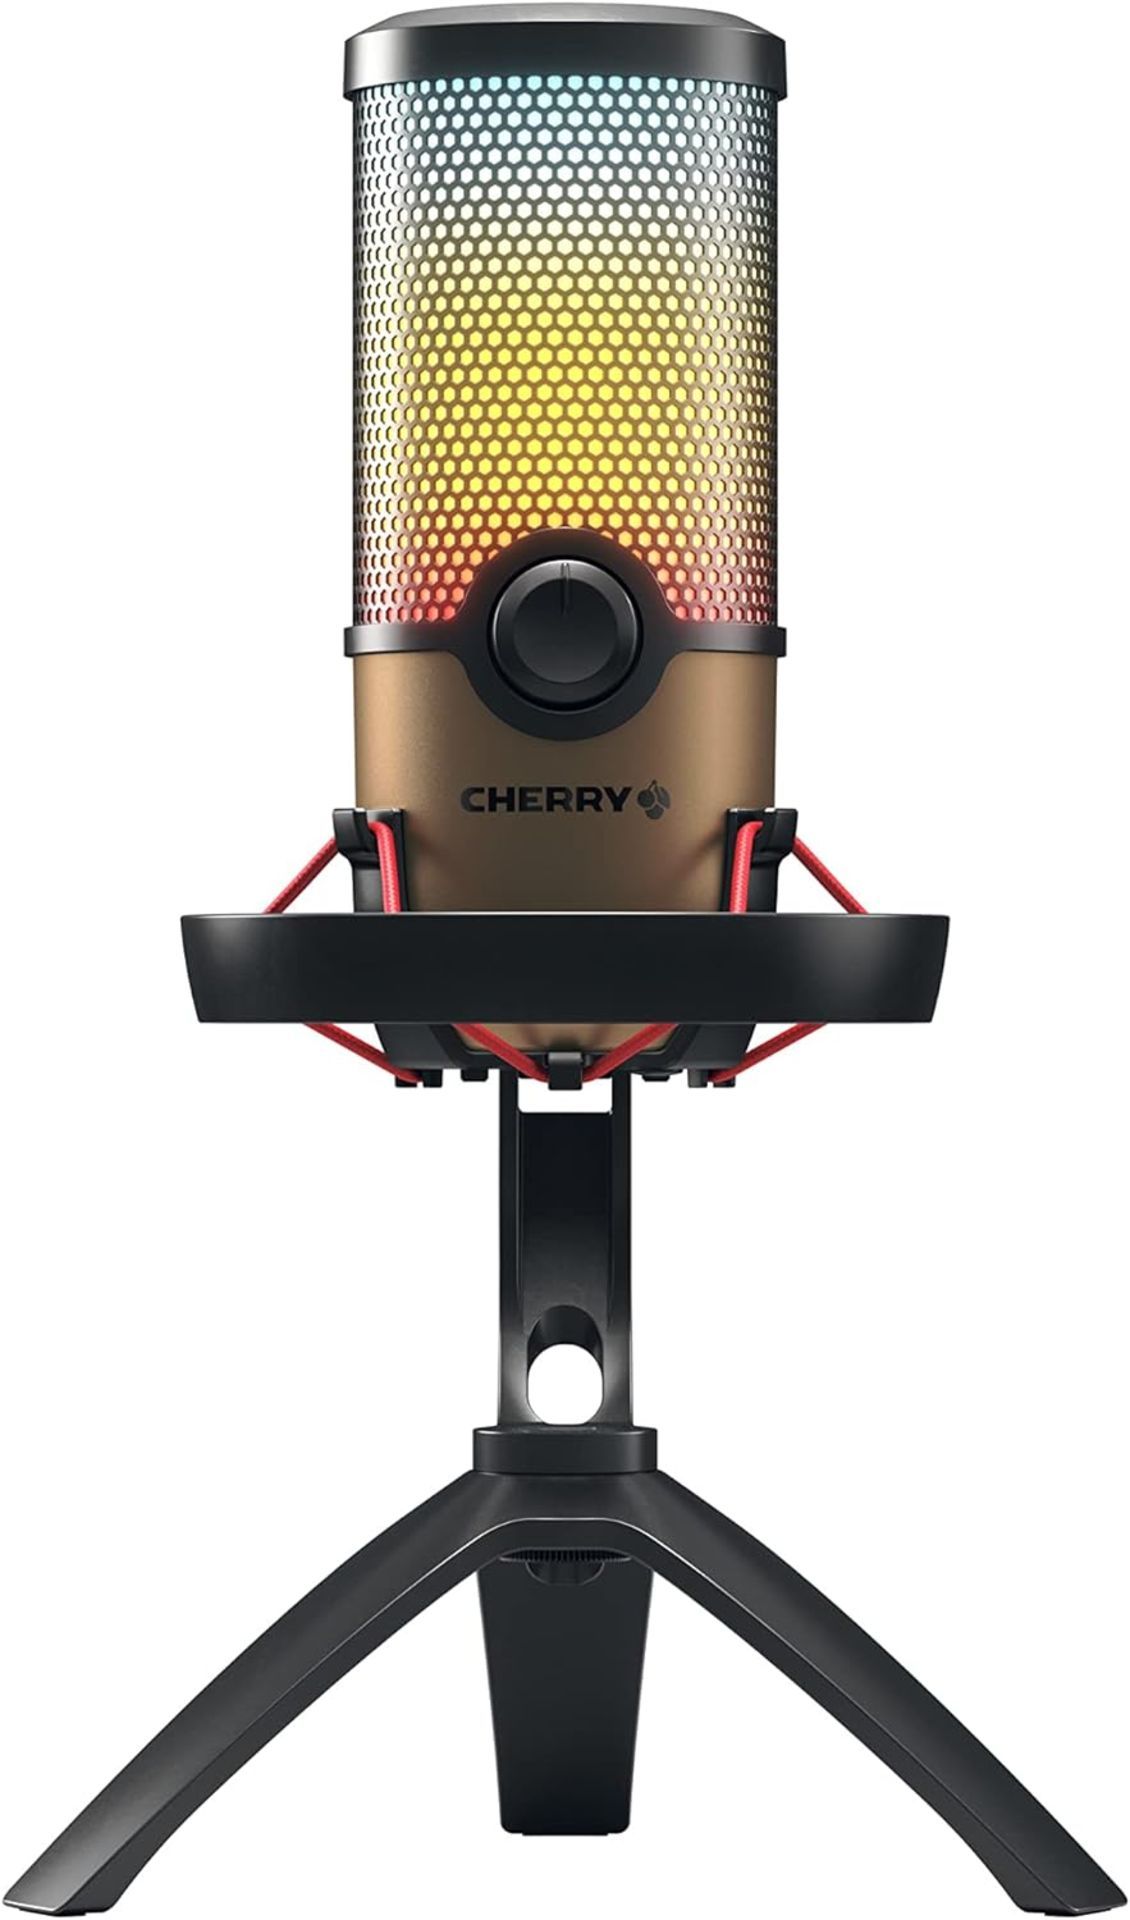 NEW & BOXED CHERRY UM 9.0 Pro RGB Black USB Desk Microphone with Shock Mount. RRP £127.99. The